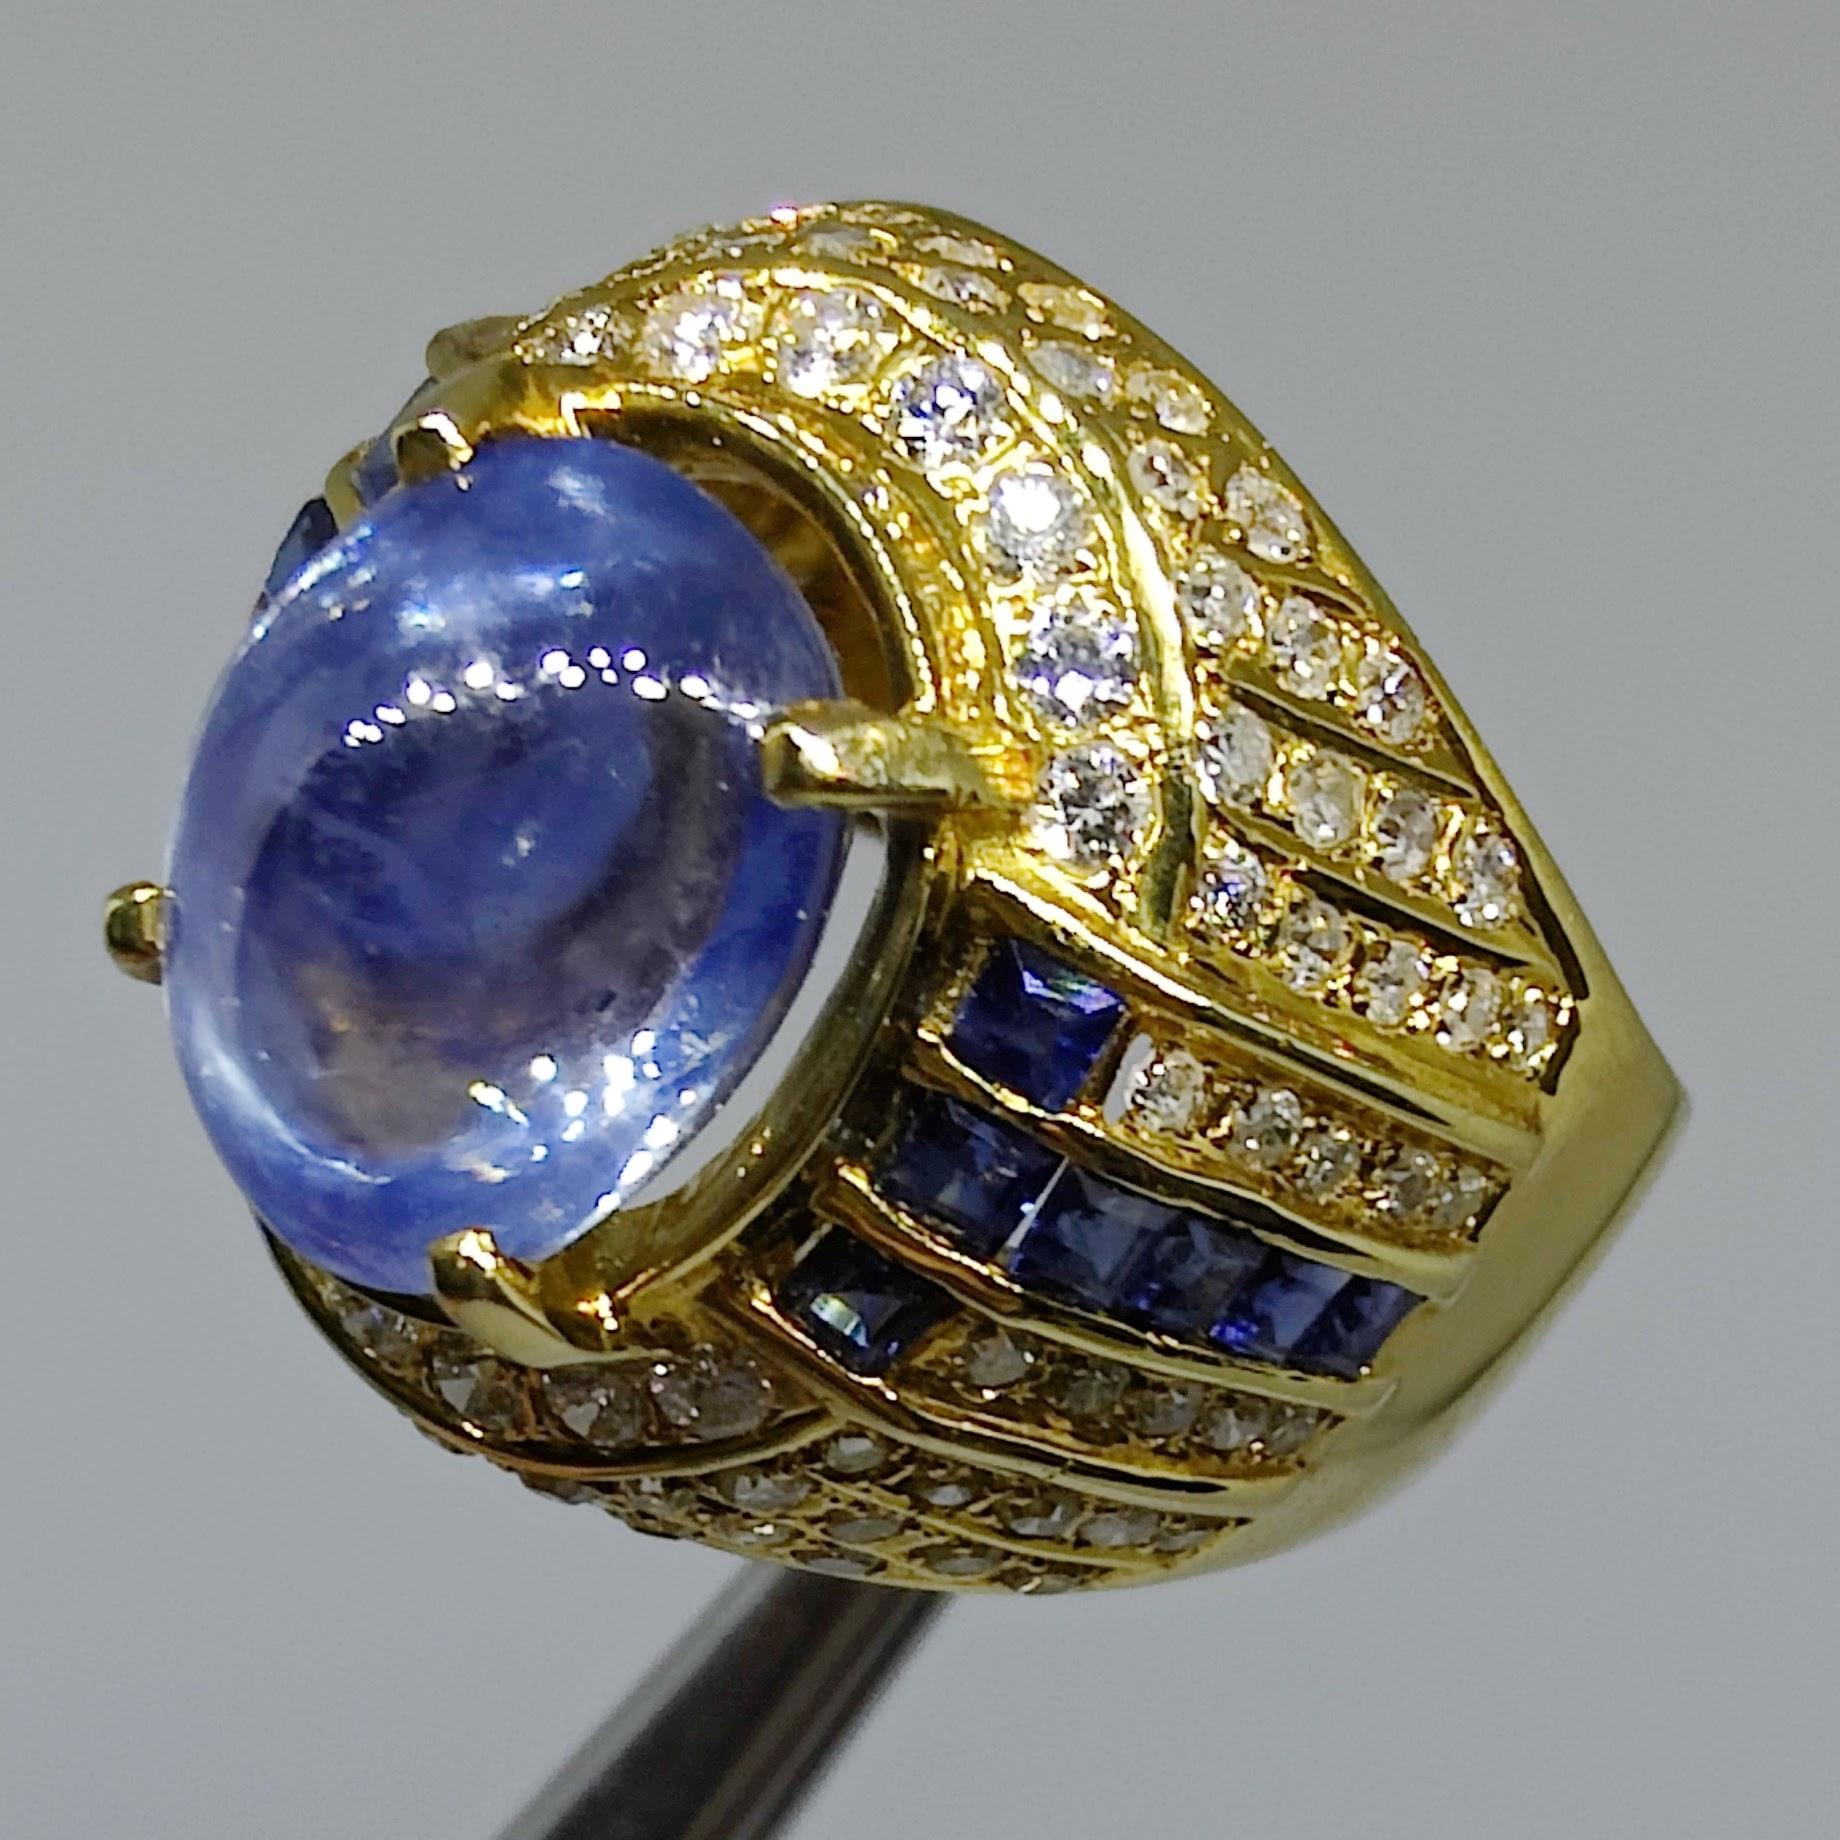 Egyptian Revival Vintage Art Deco 8.82ct Cabochon Blue Sapphire Diamond Men's Ring in 20K Gold For Sale